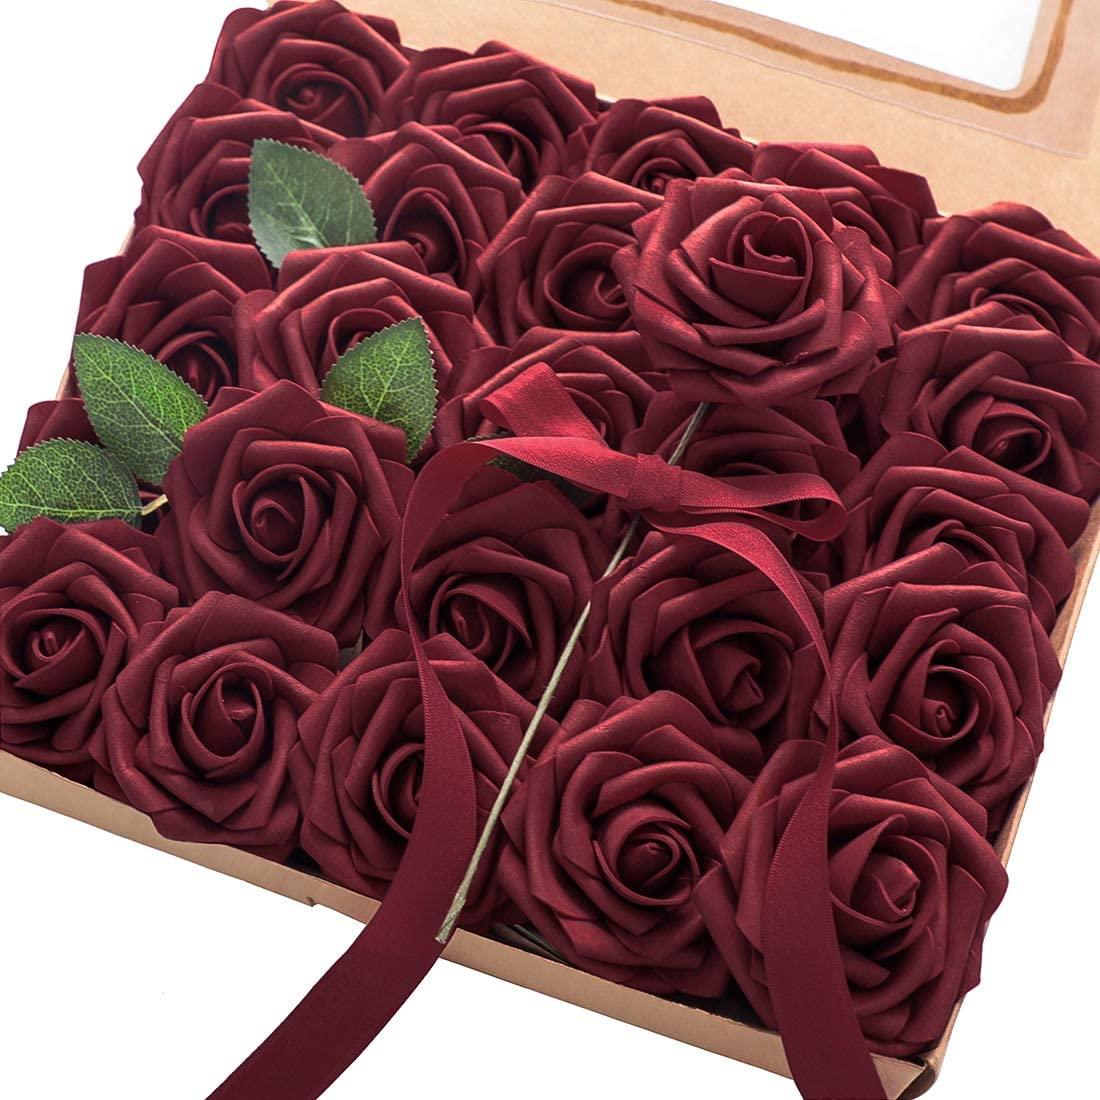 Artificial Flowers Real Looking Burgundy Foam Fake Roses with Stems for DIY Wedding Bouquets Bridal Shower Centerpieces Decorations - Decotree.co Online Shop